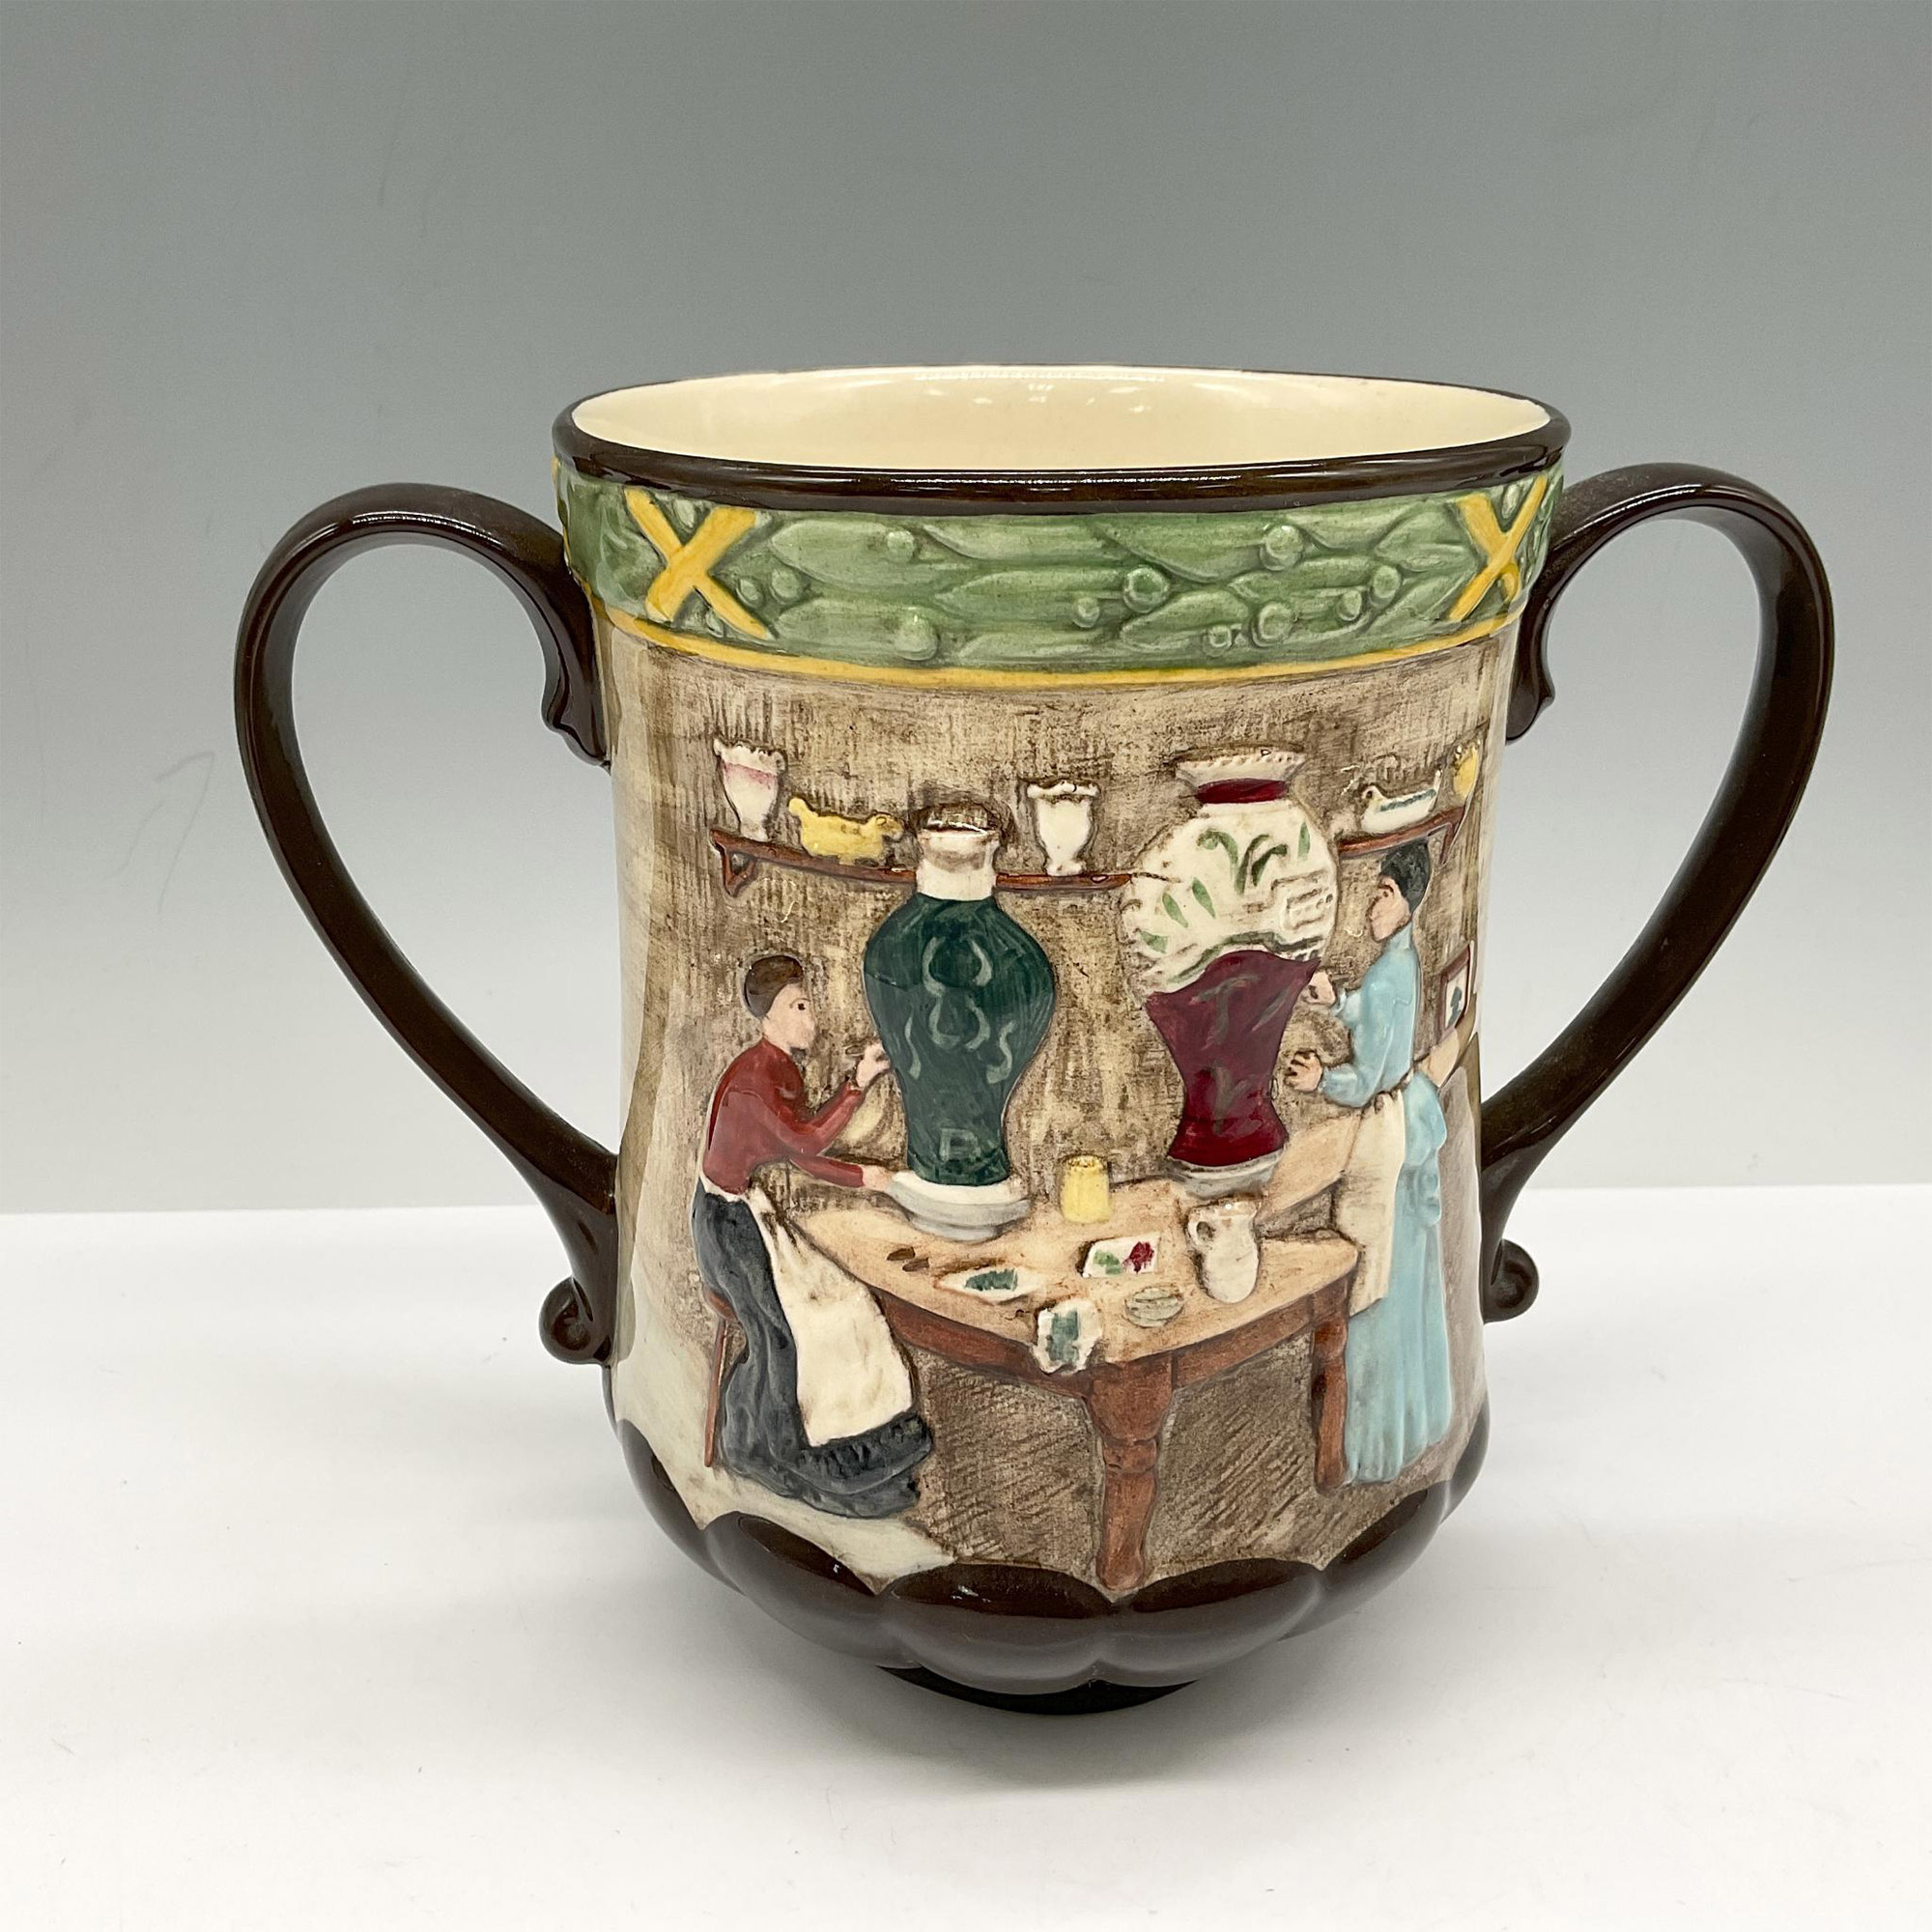 Royal Doulton Loving Cup, Pottery of the Past D6696 - Image 2 of 3